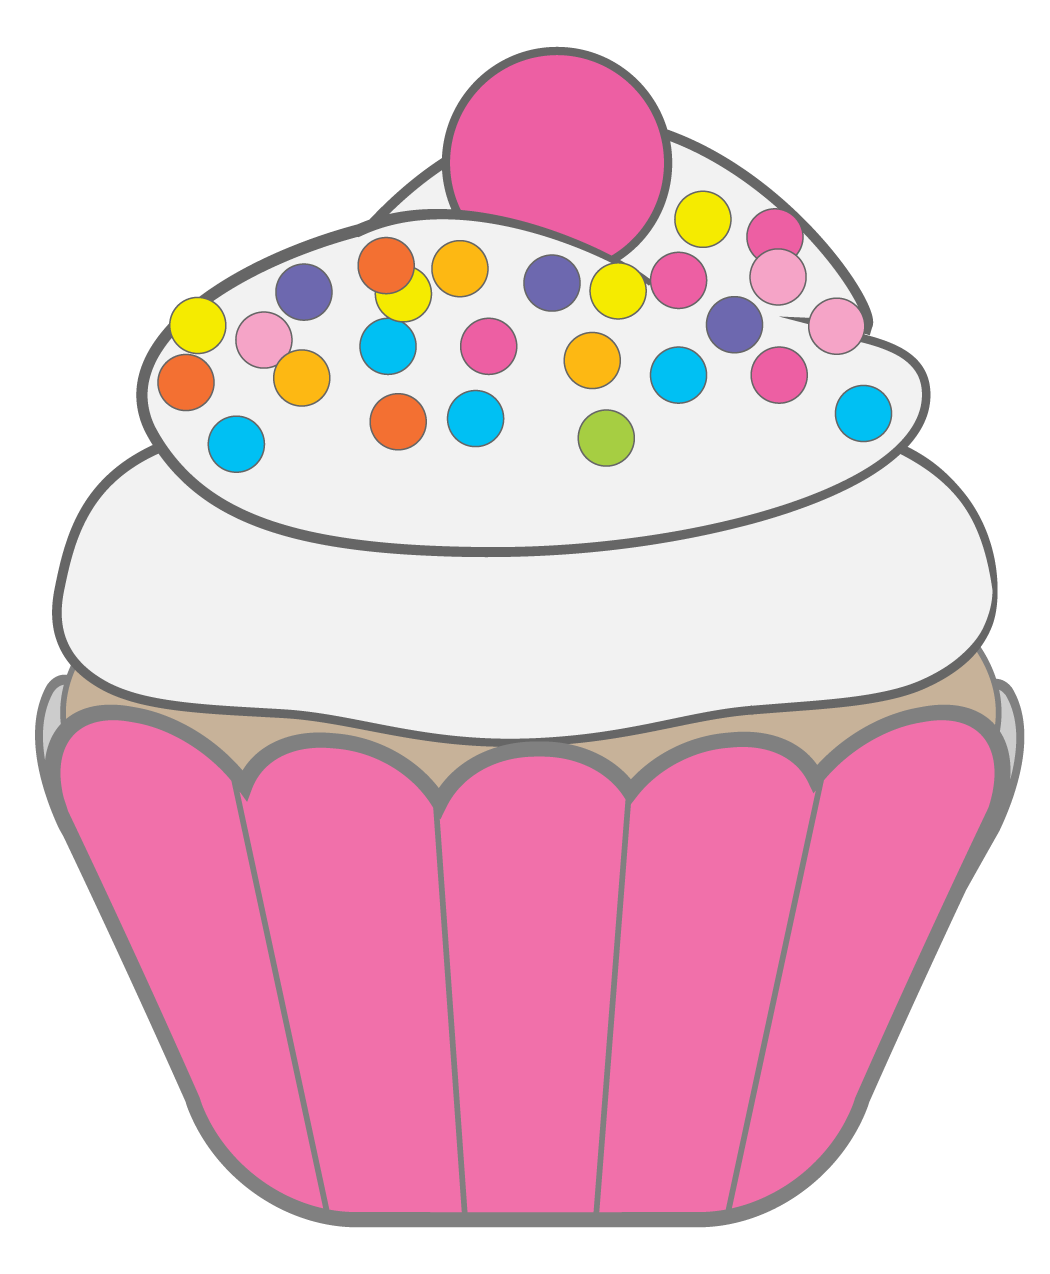 muffin clipart giant cupcake